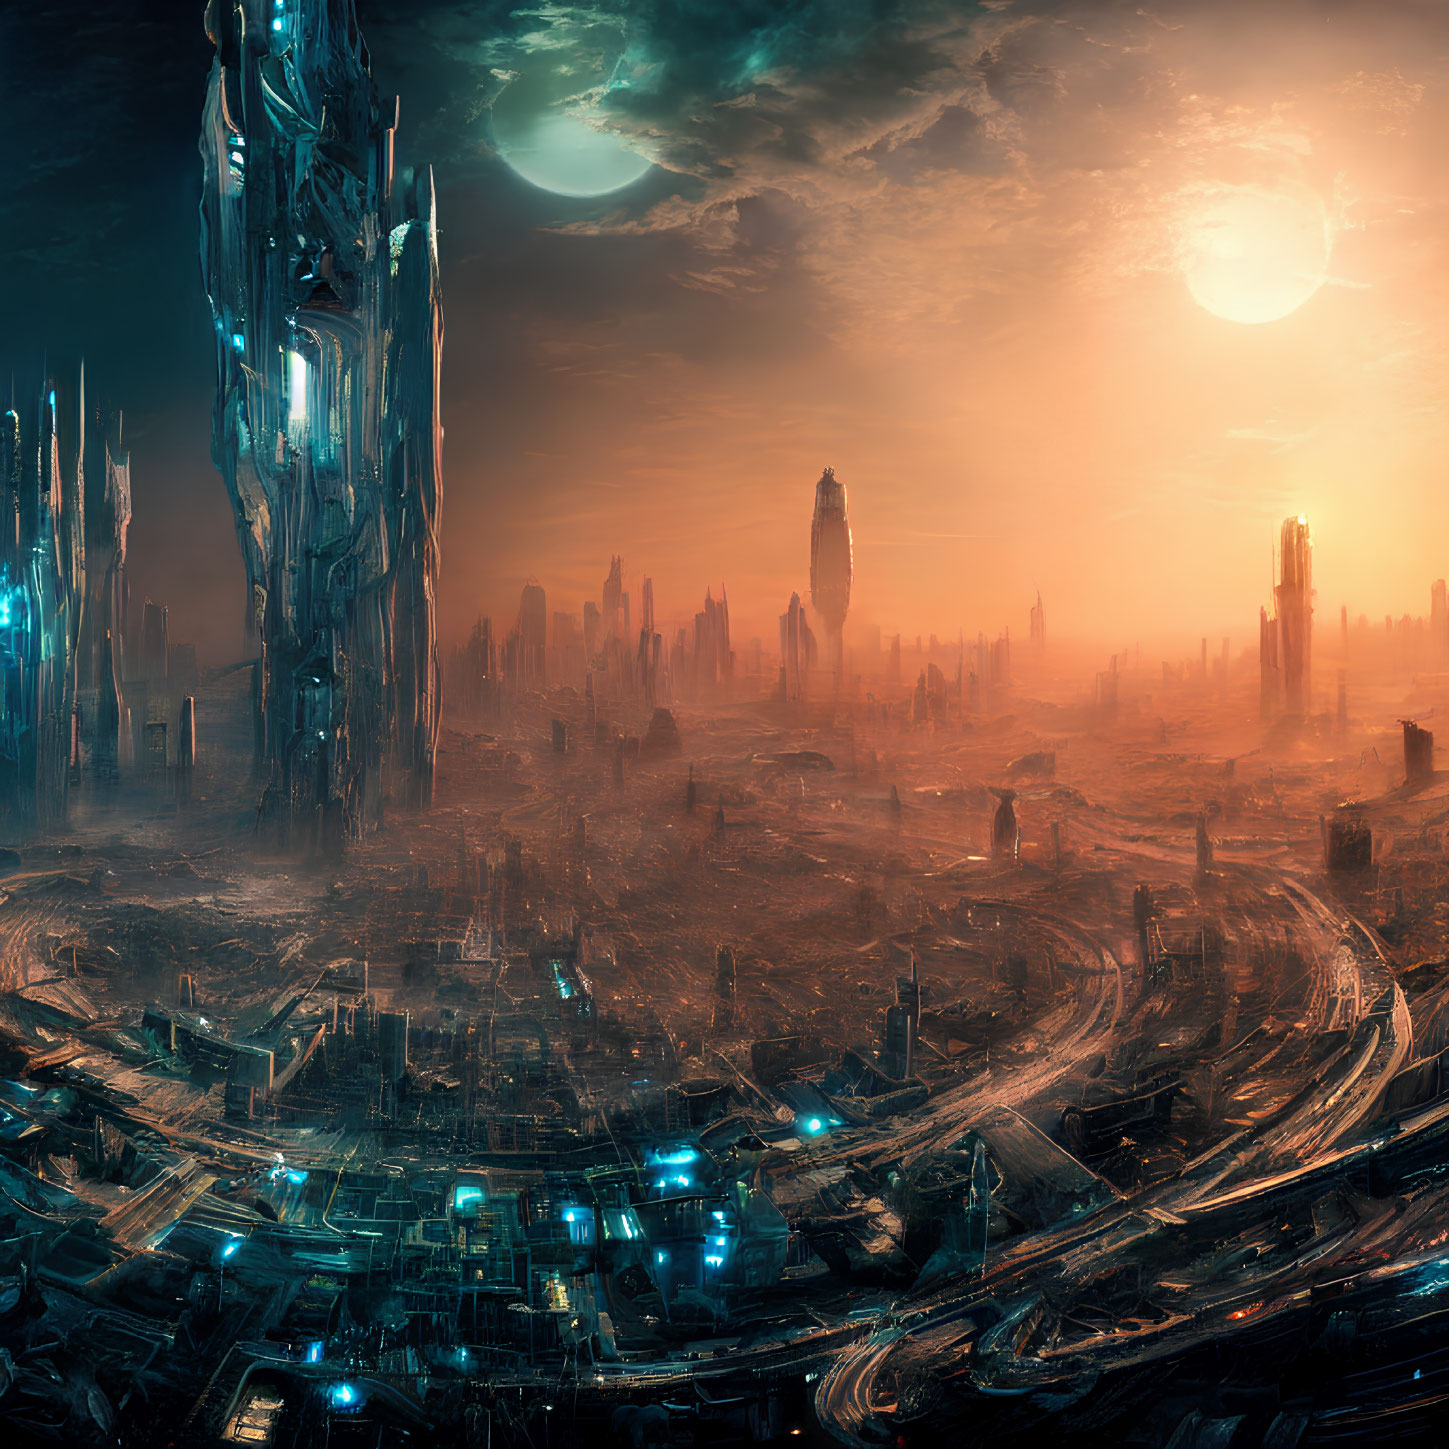 Futuristic cityscape with towering skyscrapers and two suns in an orange sky